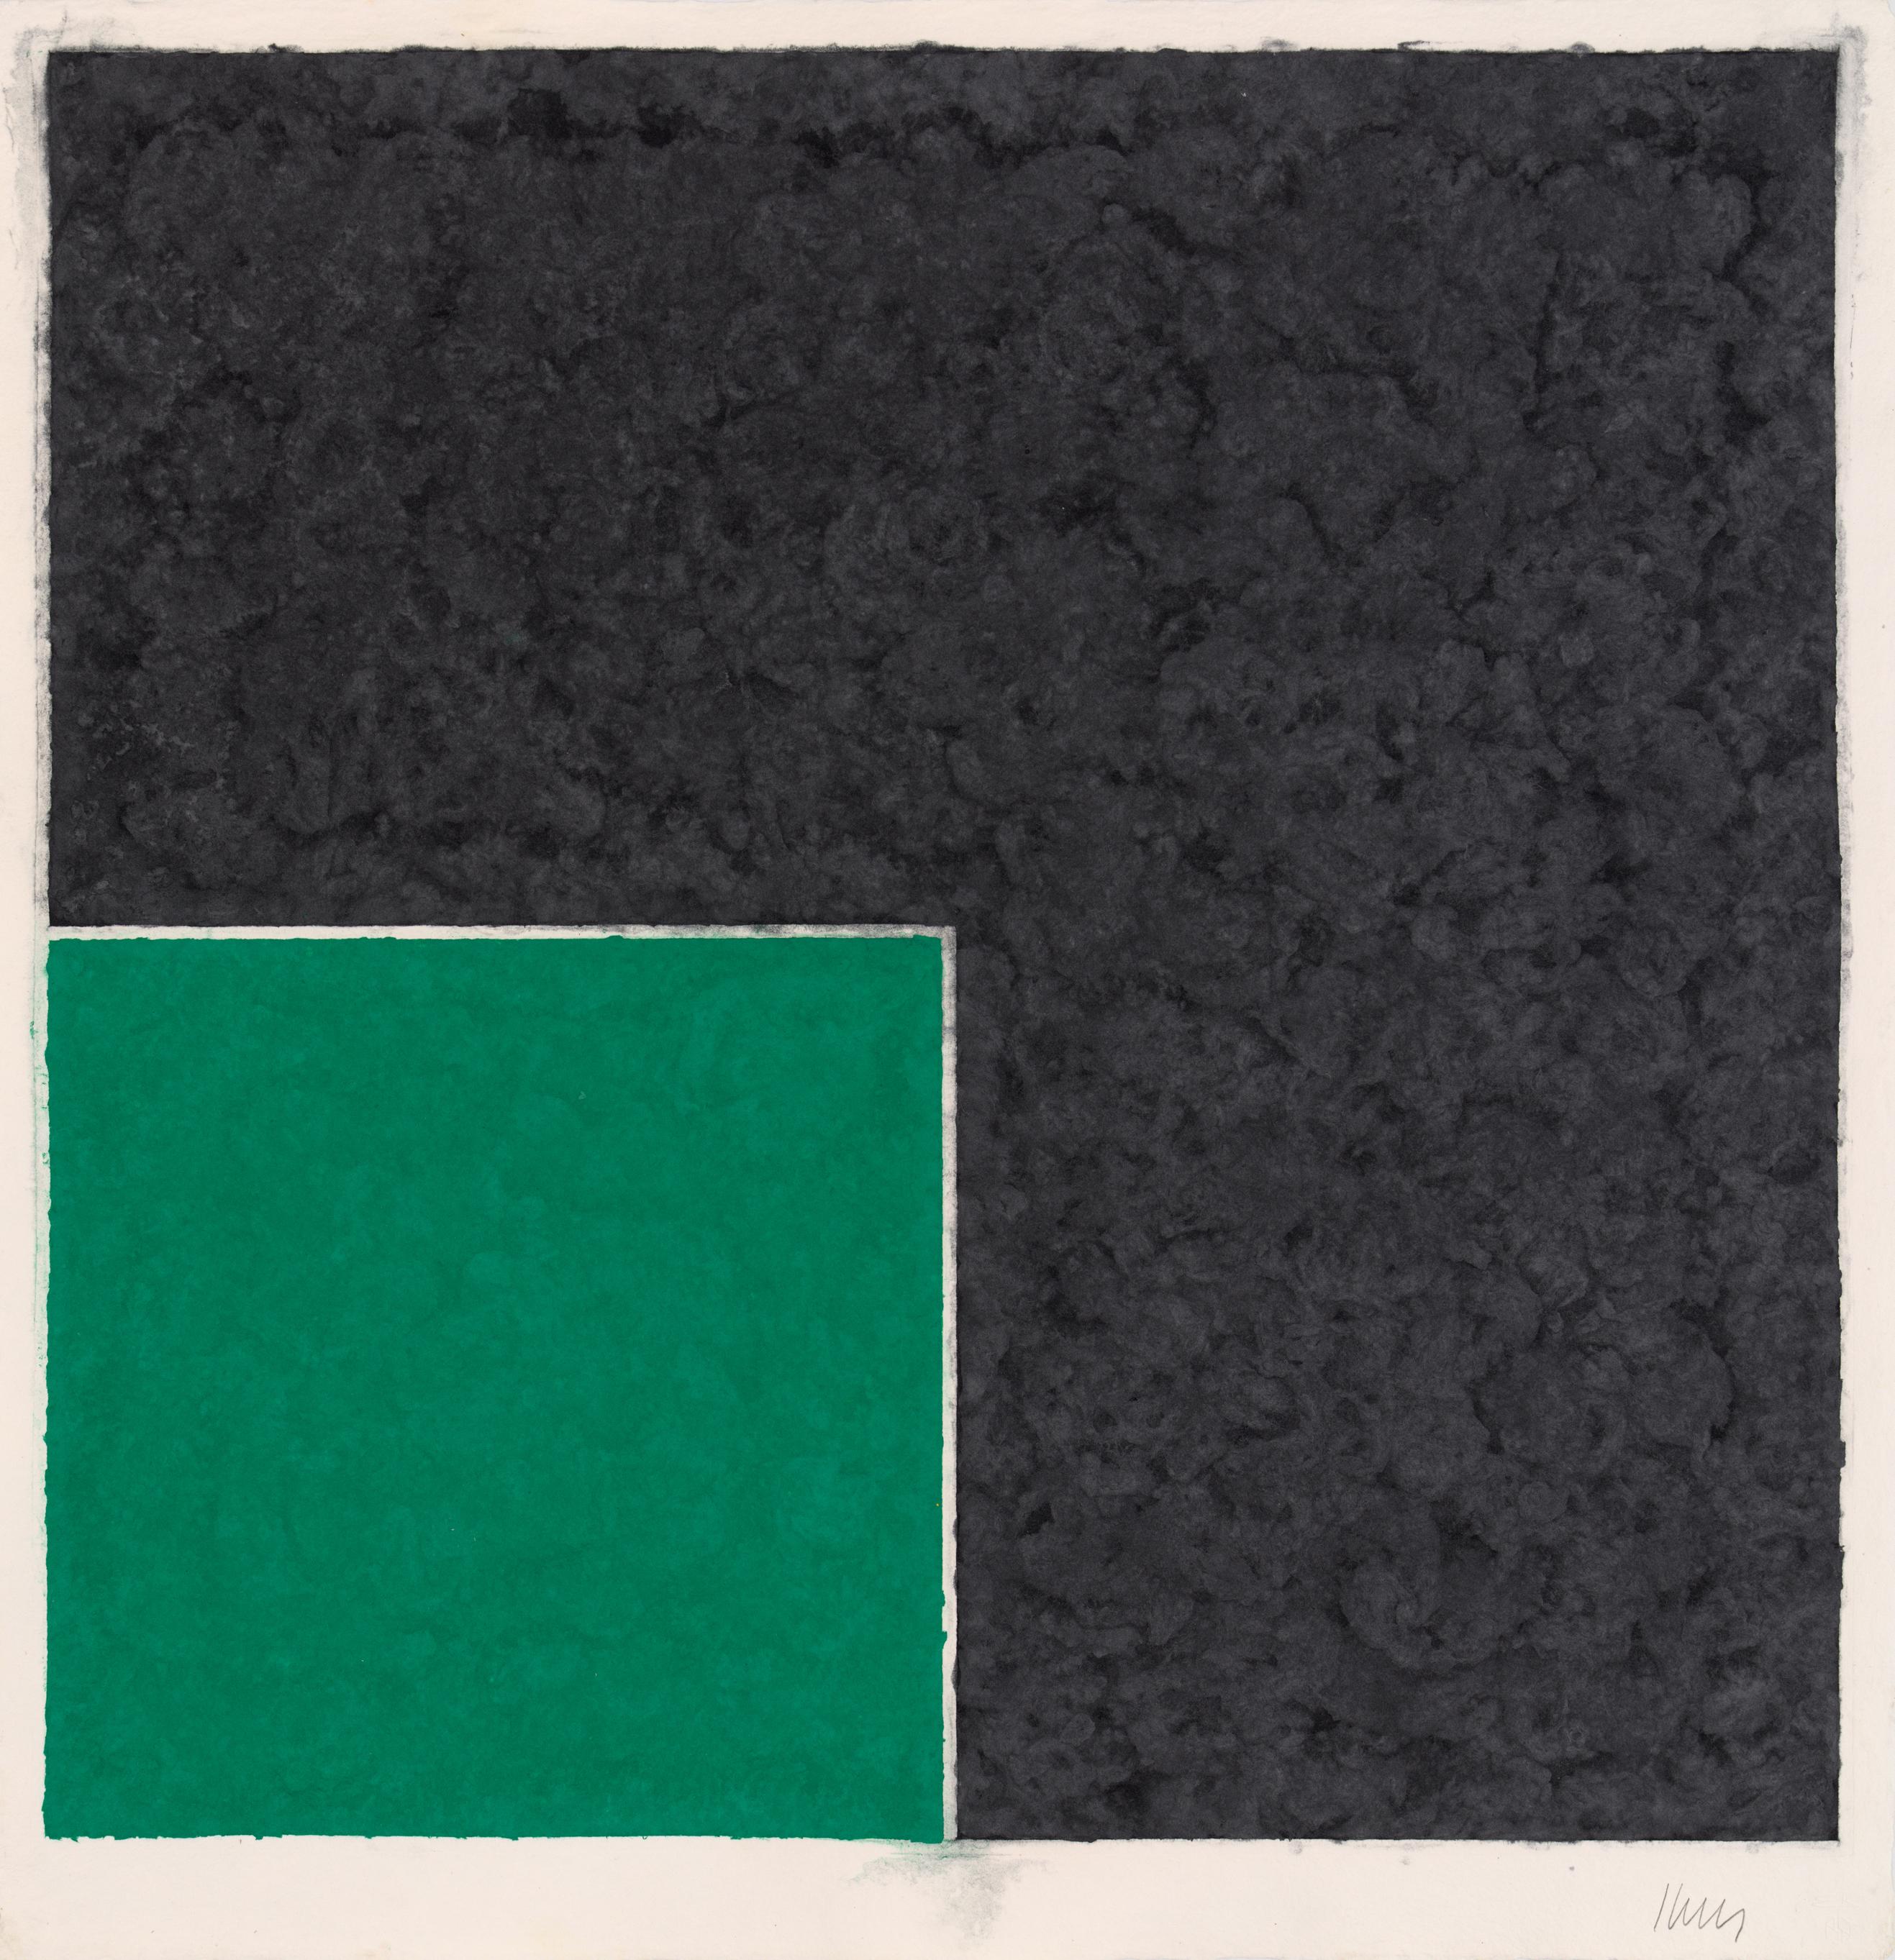 Colored Paper Image XVIII (Green Square with Dark Gray)